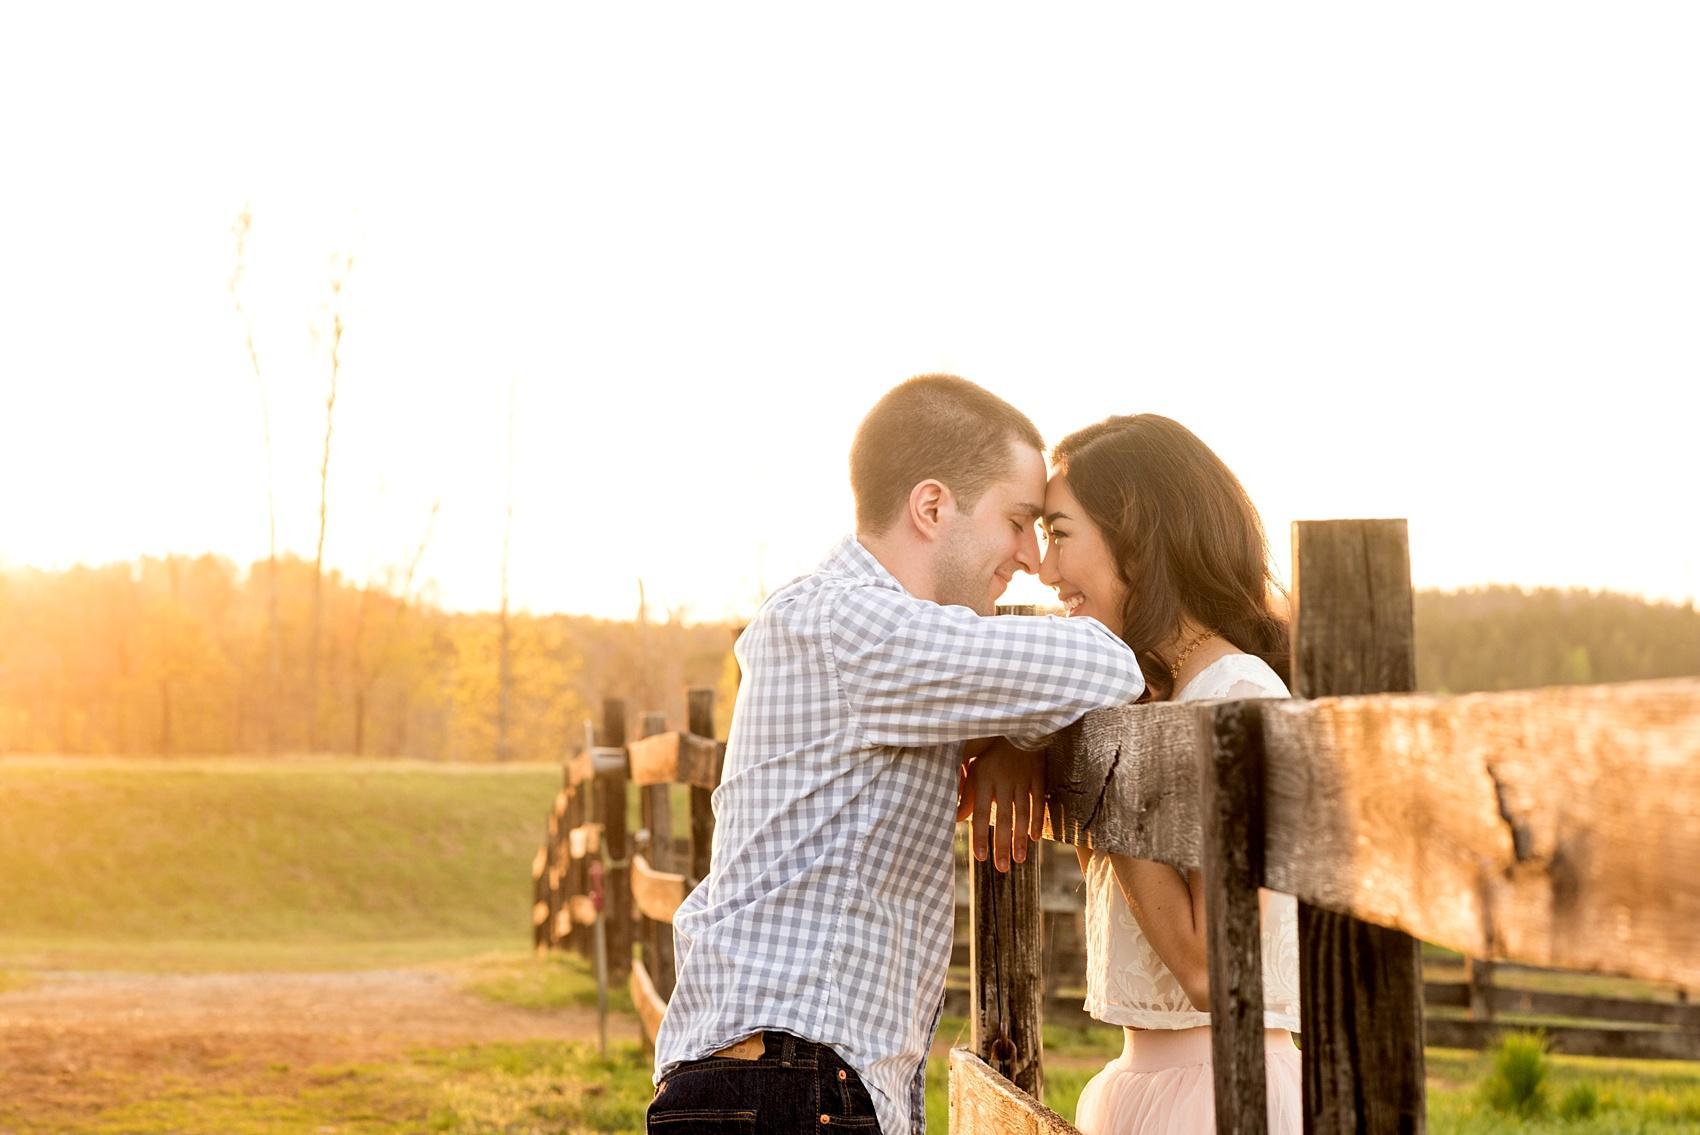 Raleigh farm engagement photos during the golden hour with a wooden fence during the golden hour. Images by Mikkel Paige Photography.